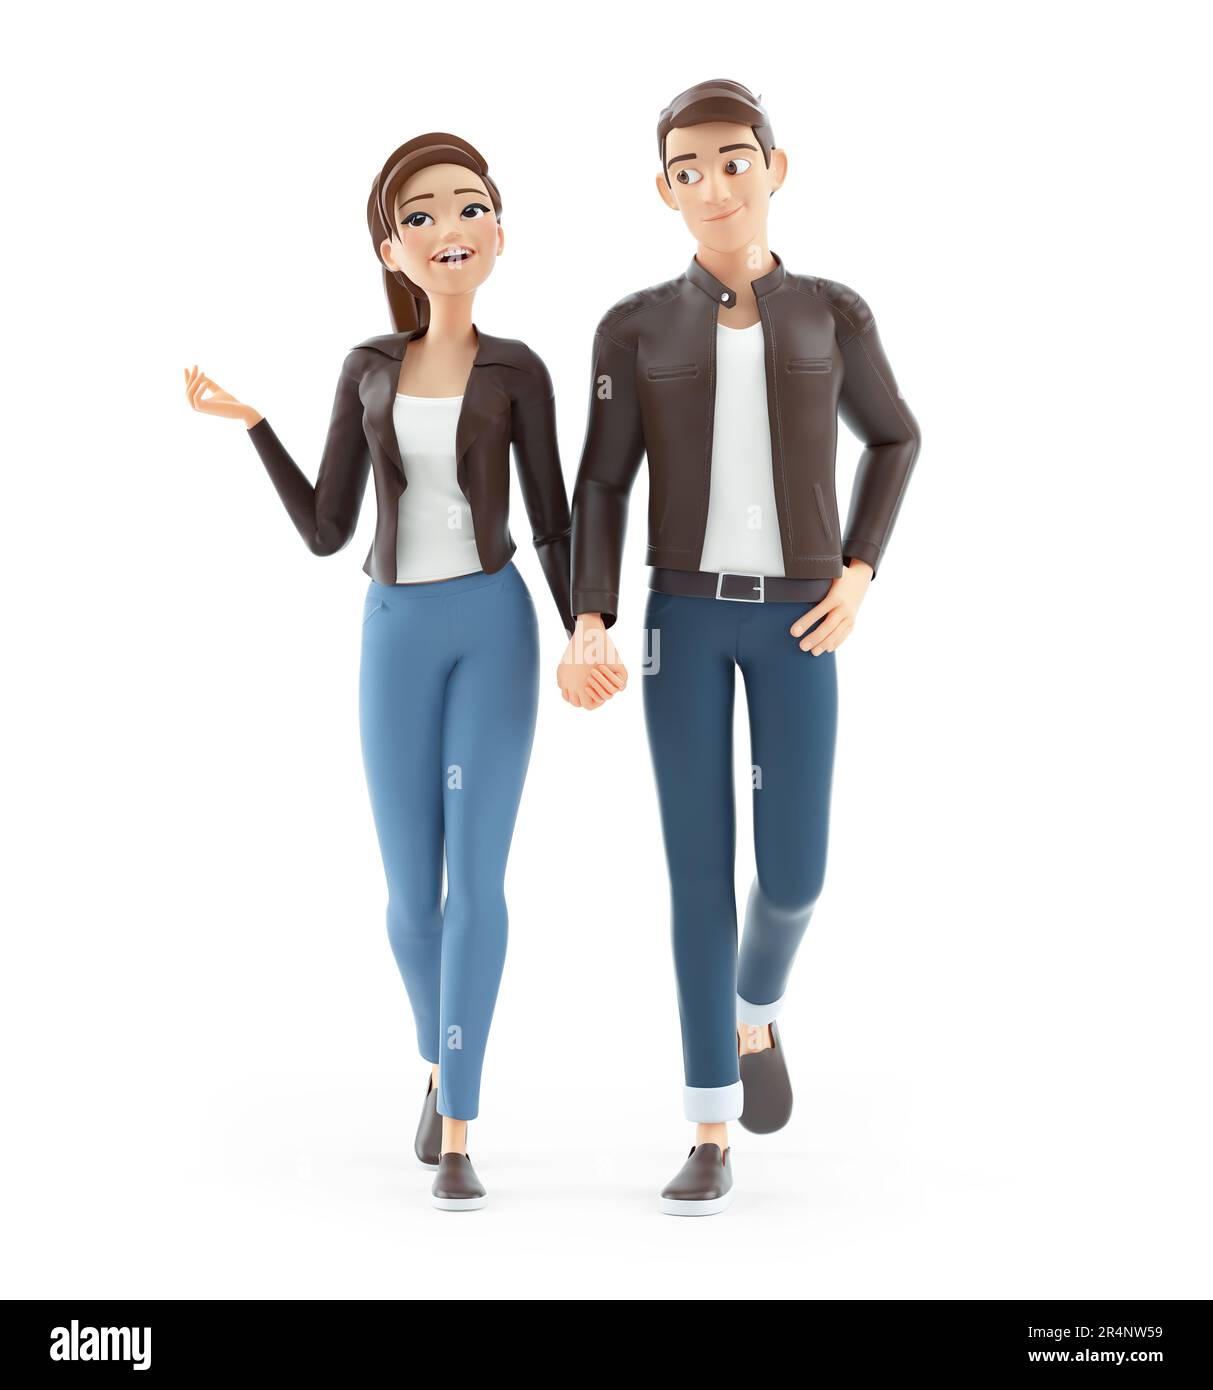 3d cartoon man and woman walking hand in hand, illustration isolated on white background Stock Photo